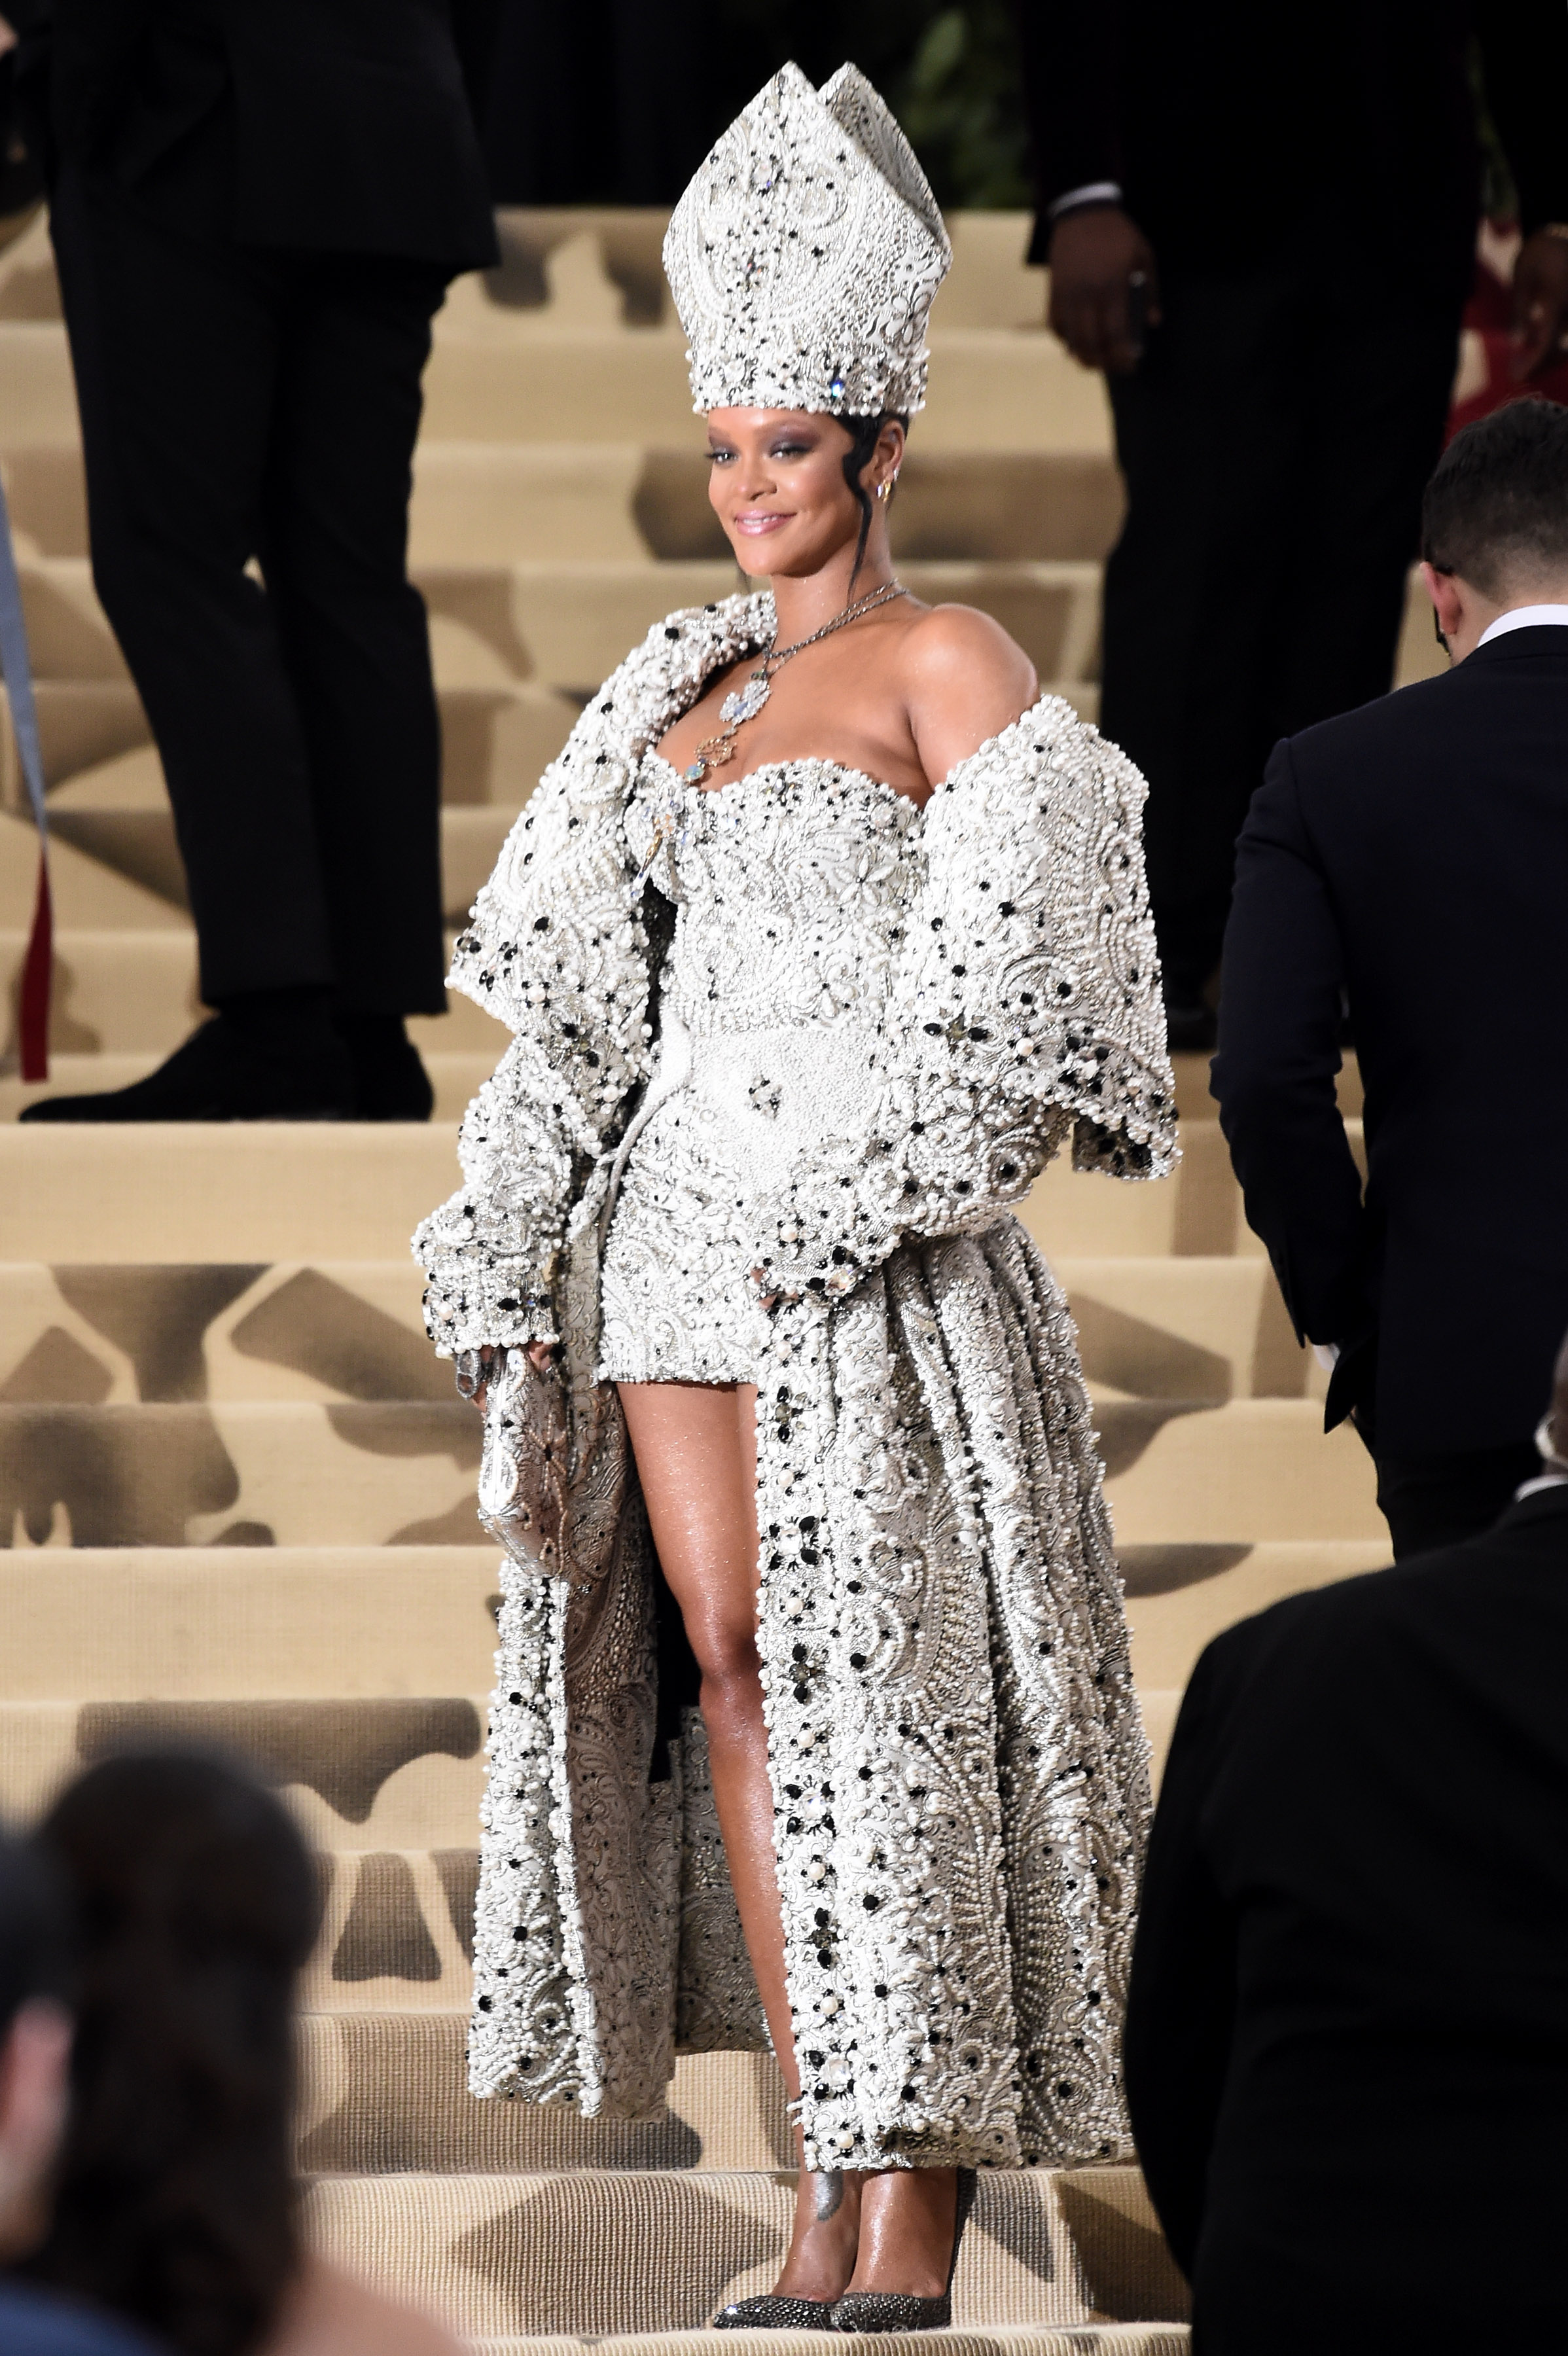 NEW YORK, NY - MAY 07:  Rihanna attends Heavenly Bodies: Fashion &amp; The Catholic Imagination Costume Institute Gala at Metropolitan Museum of Art on May 7, 2018 in New York City.  (Photo by Steven Ferdman/Getty Images)